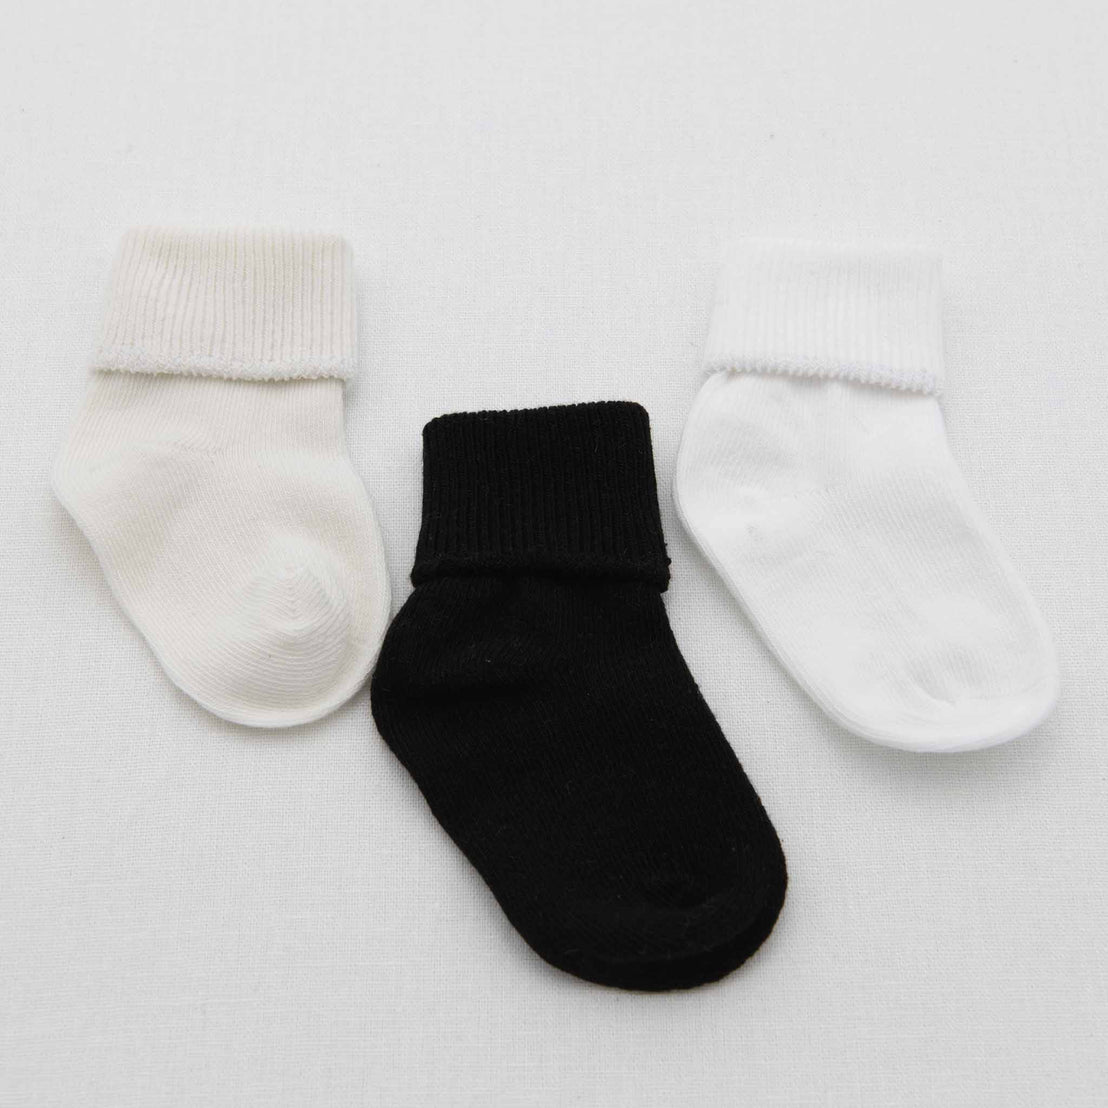 Three Girls Simple Socks in black, gray, and white are elegantly displayed side by side on a plain white background.